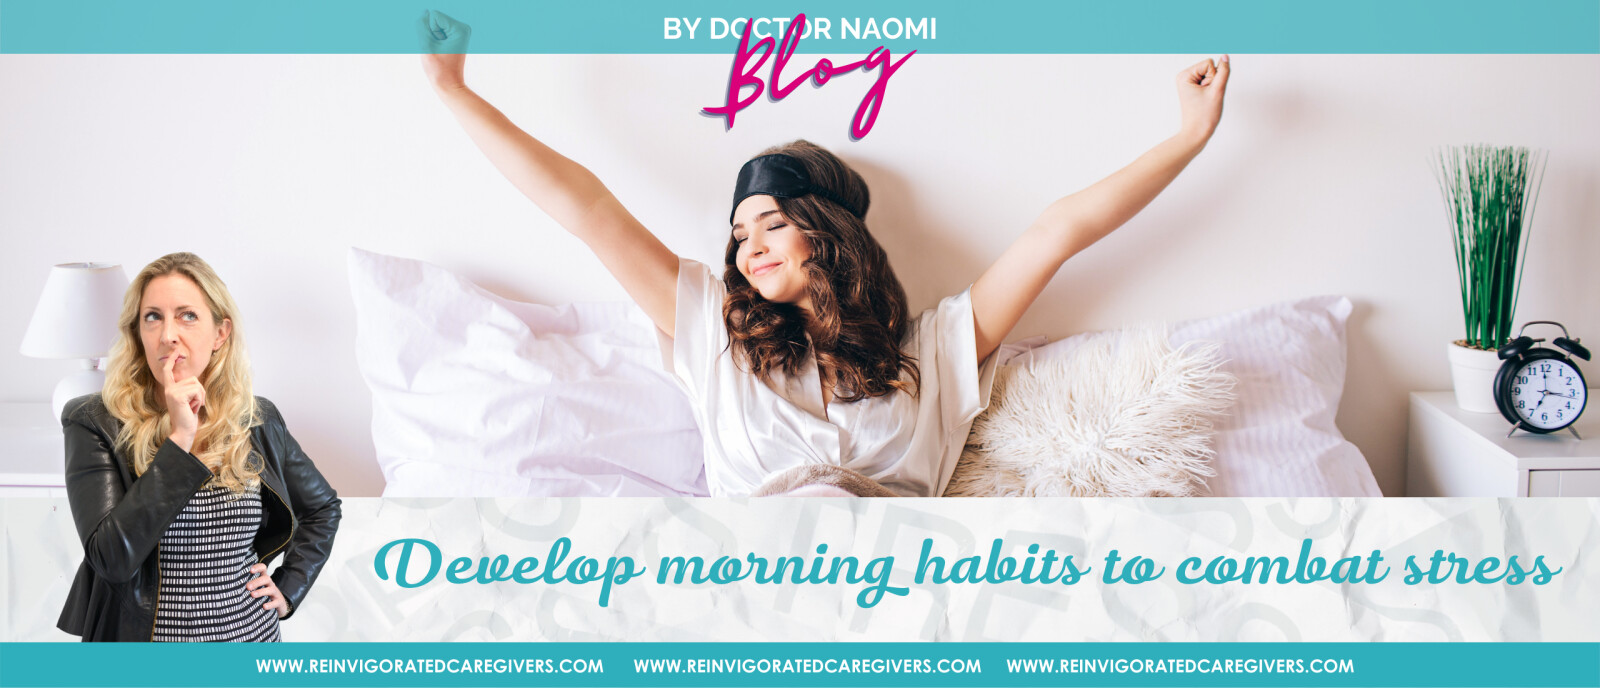 Developing morning habits to combat stress